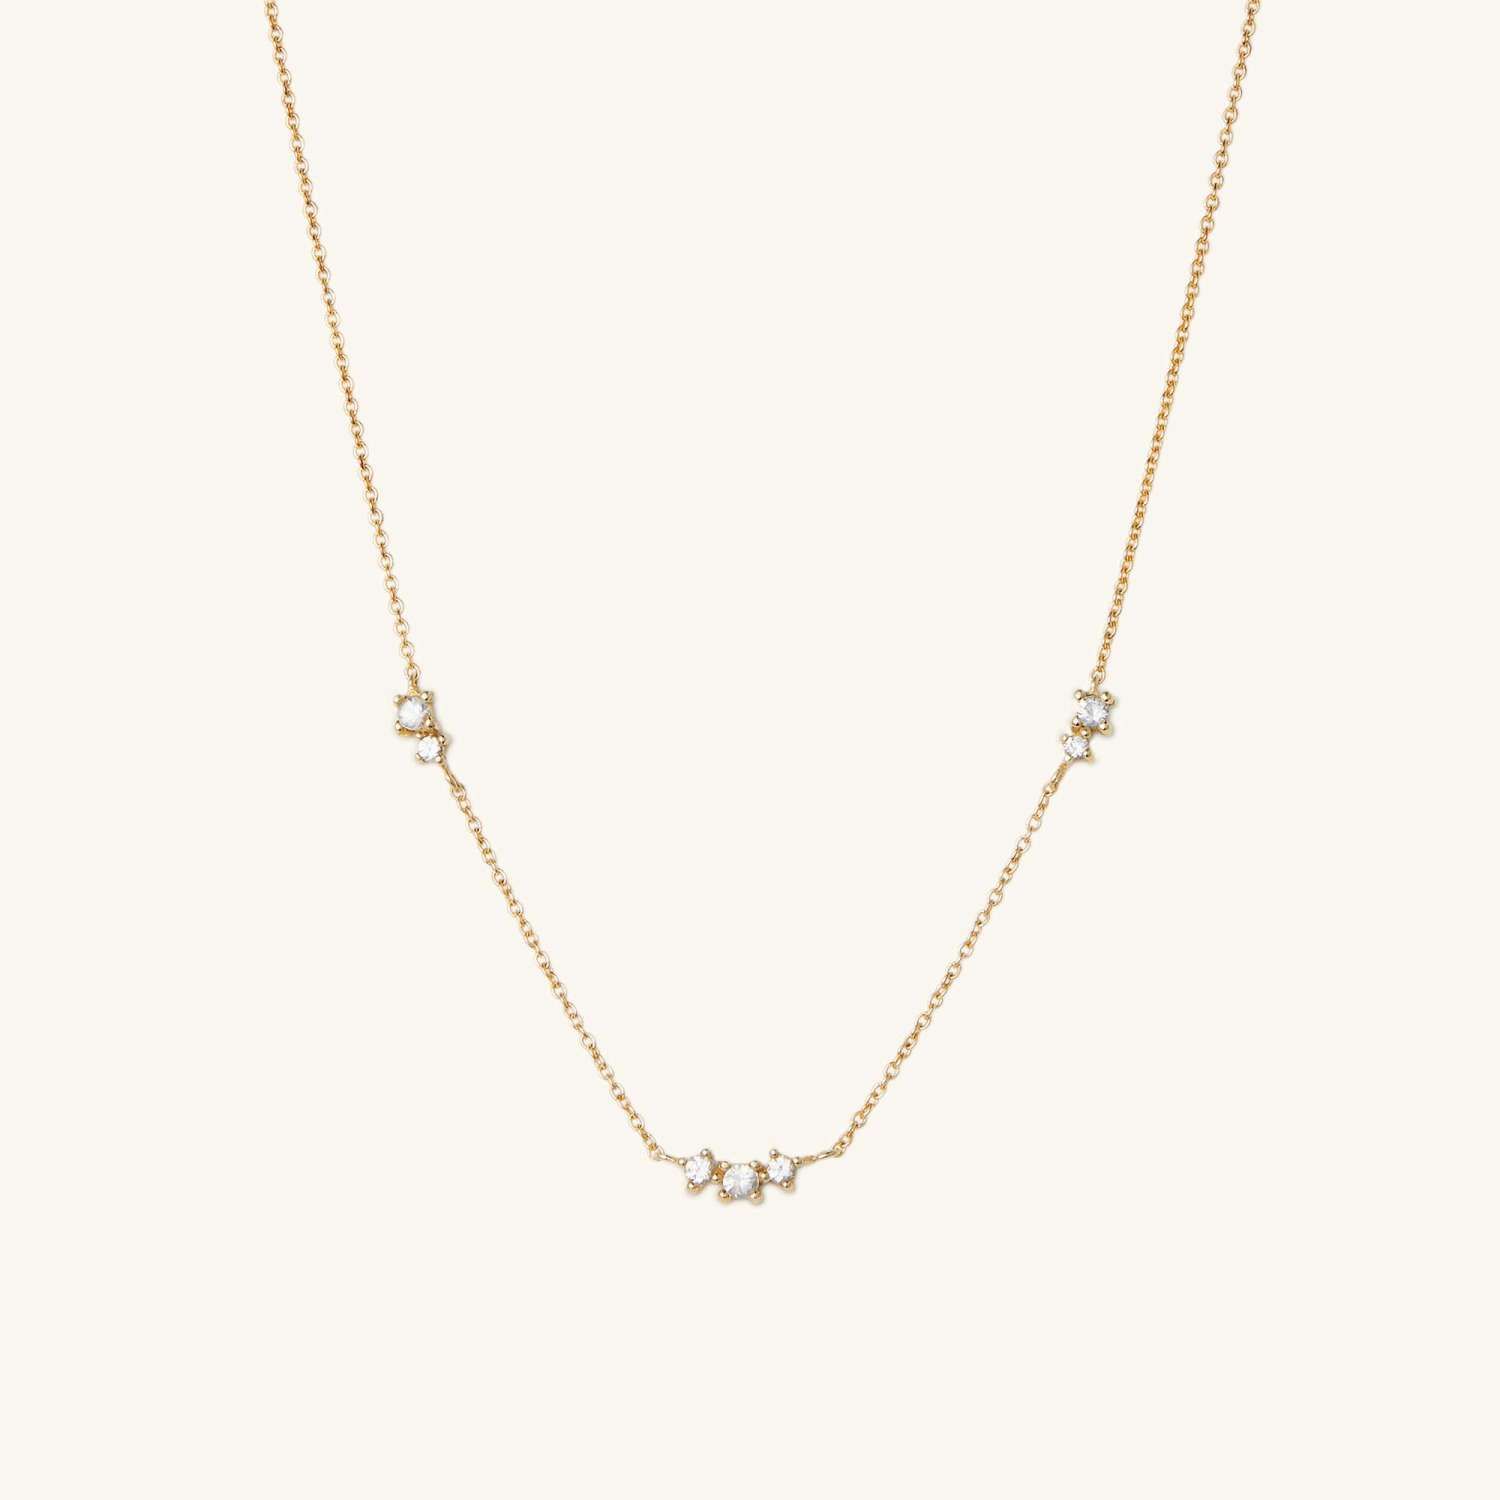 Floating Sapphire Necklace - $98 | Mejuri (Global)